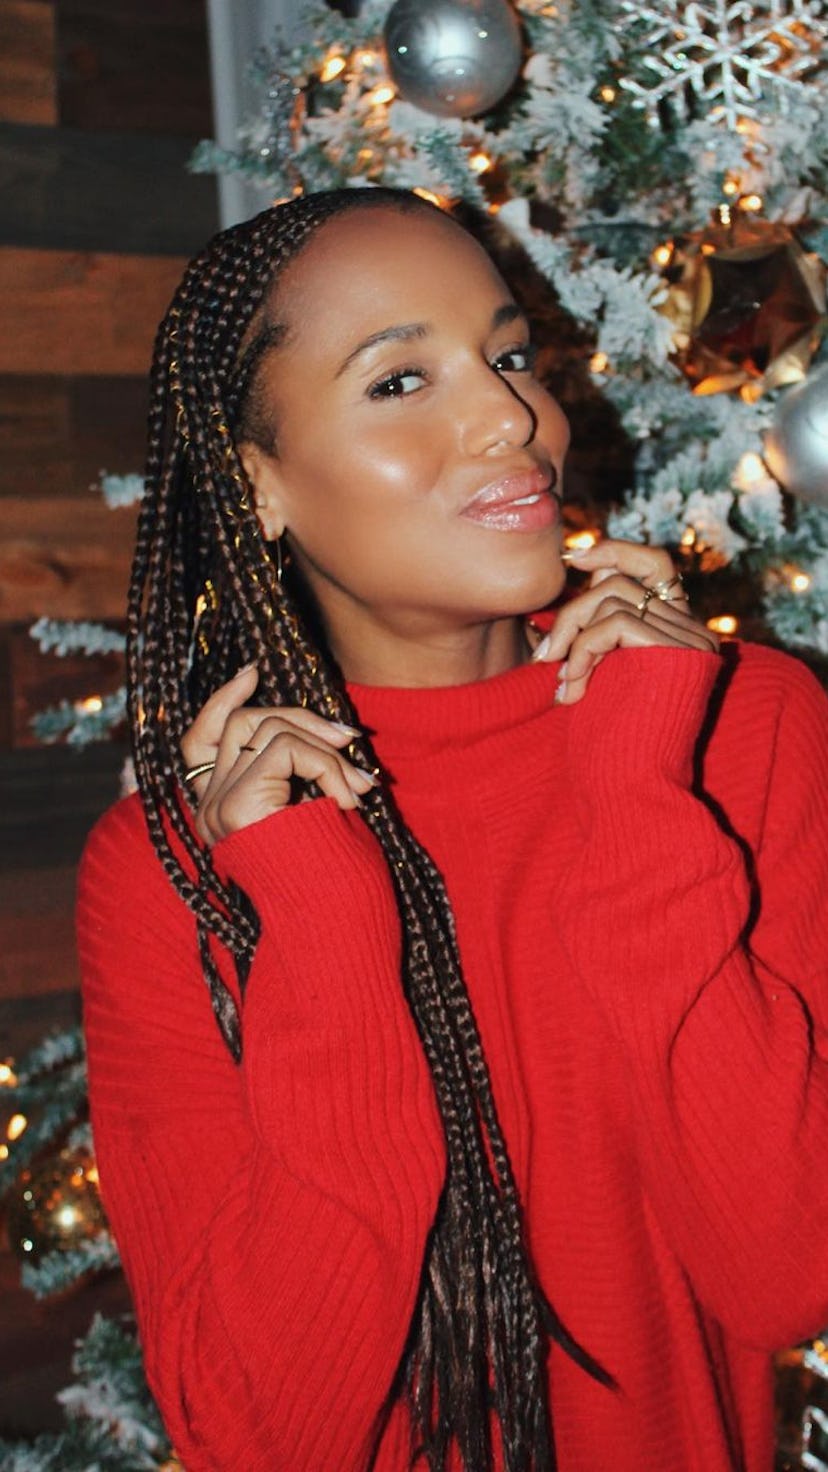 Kerry Washington long blonde ombre braids and dewy orange blush in red sweater Christmas 2022